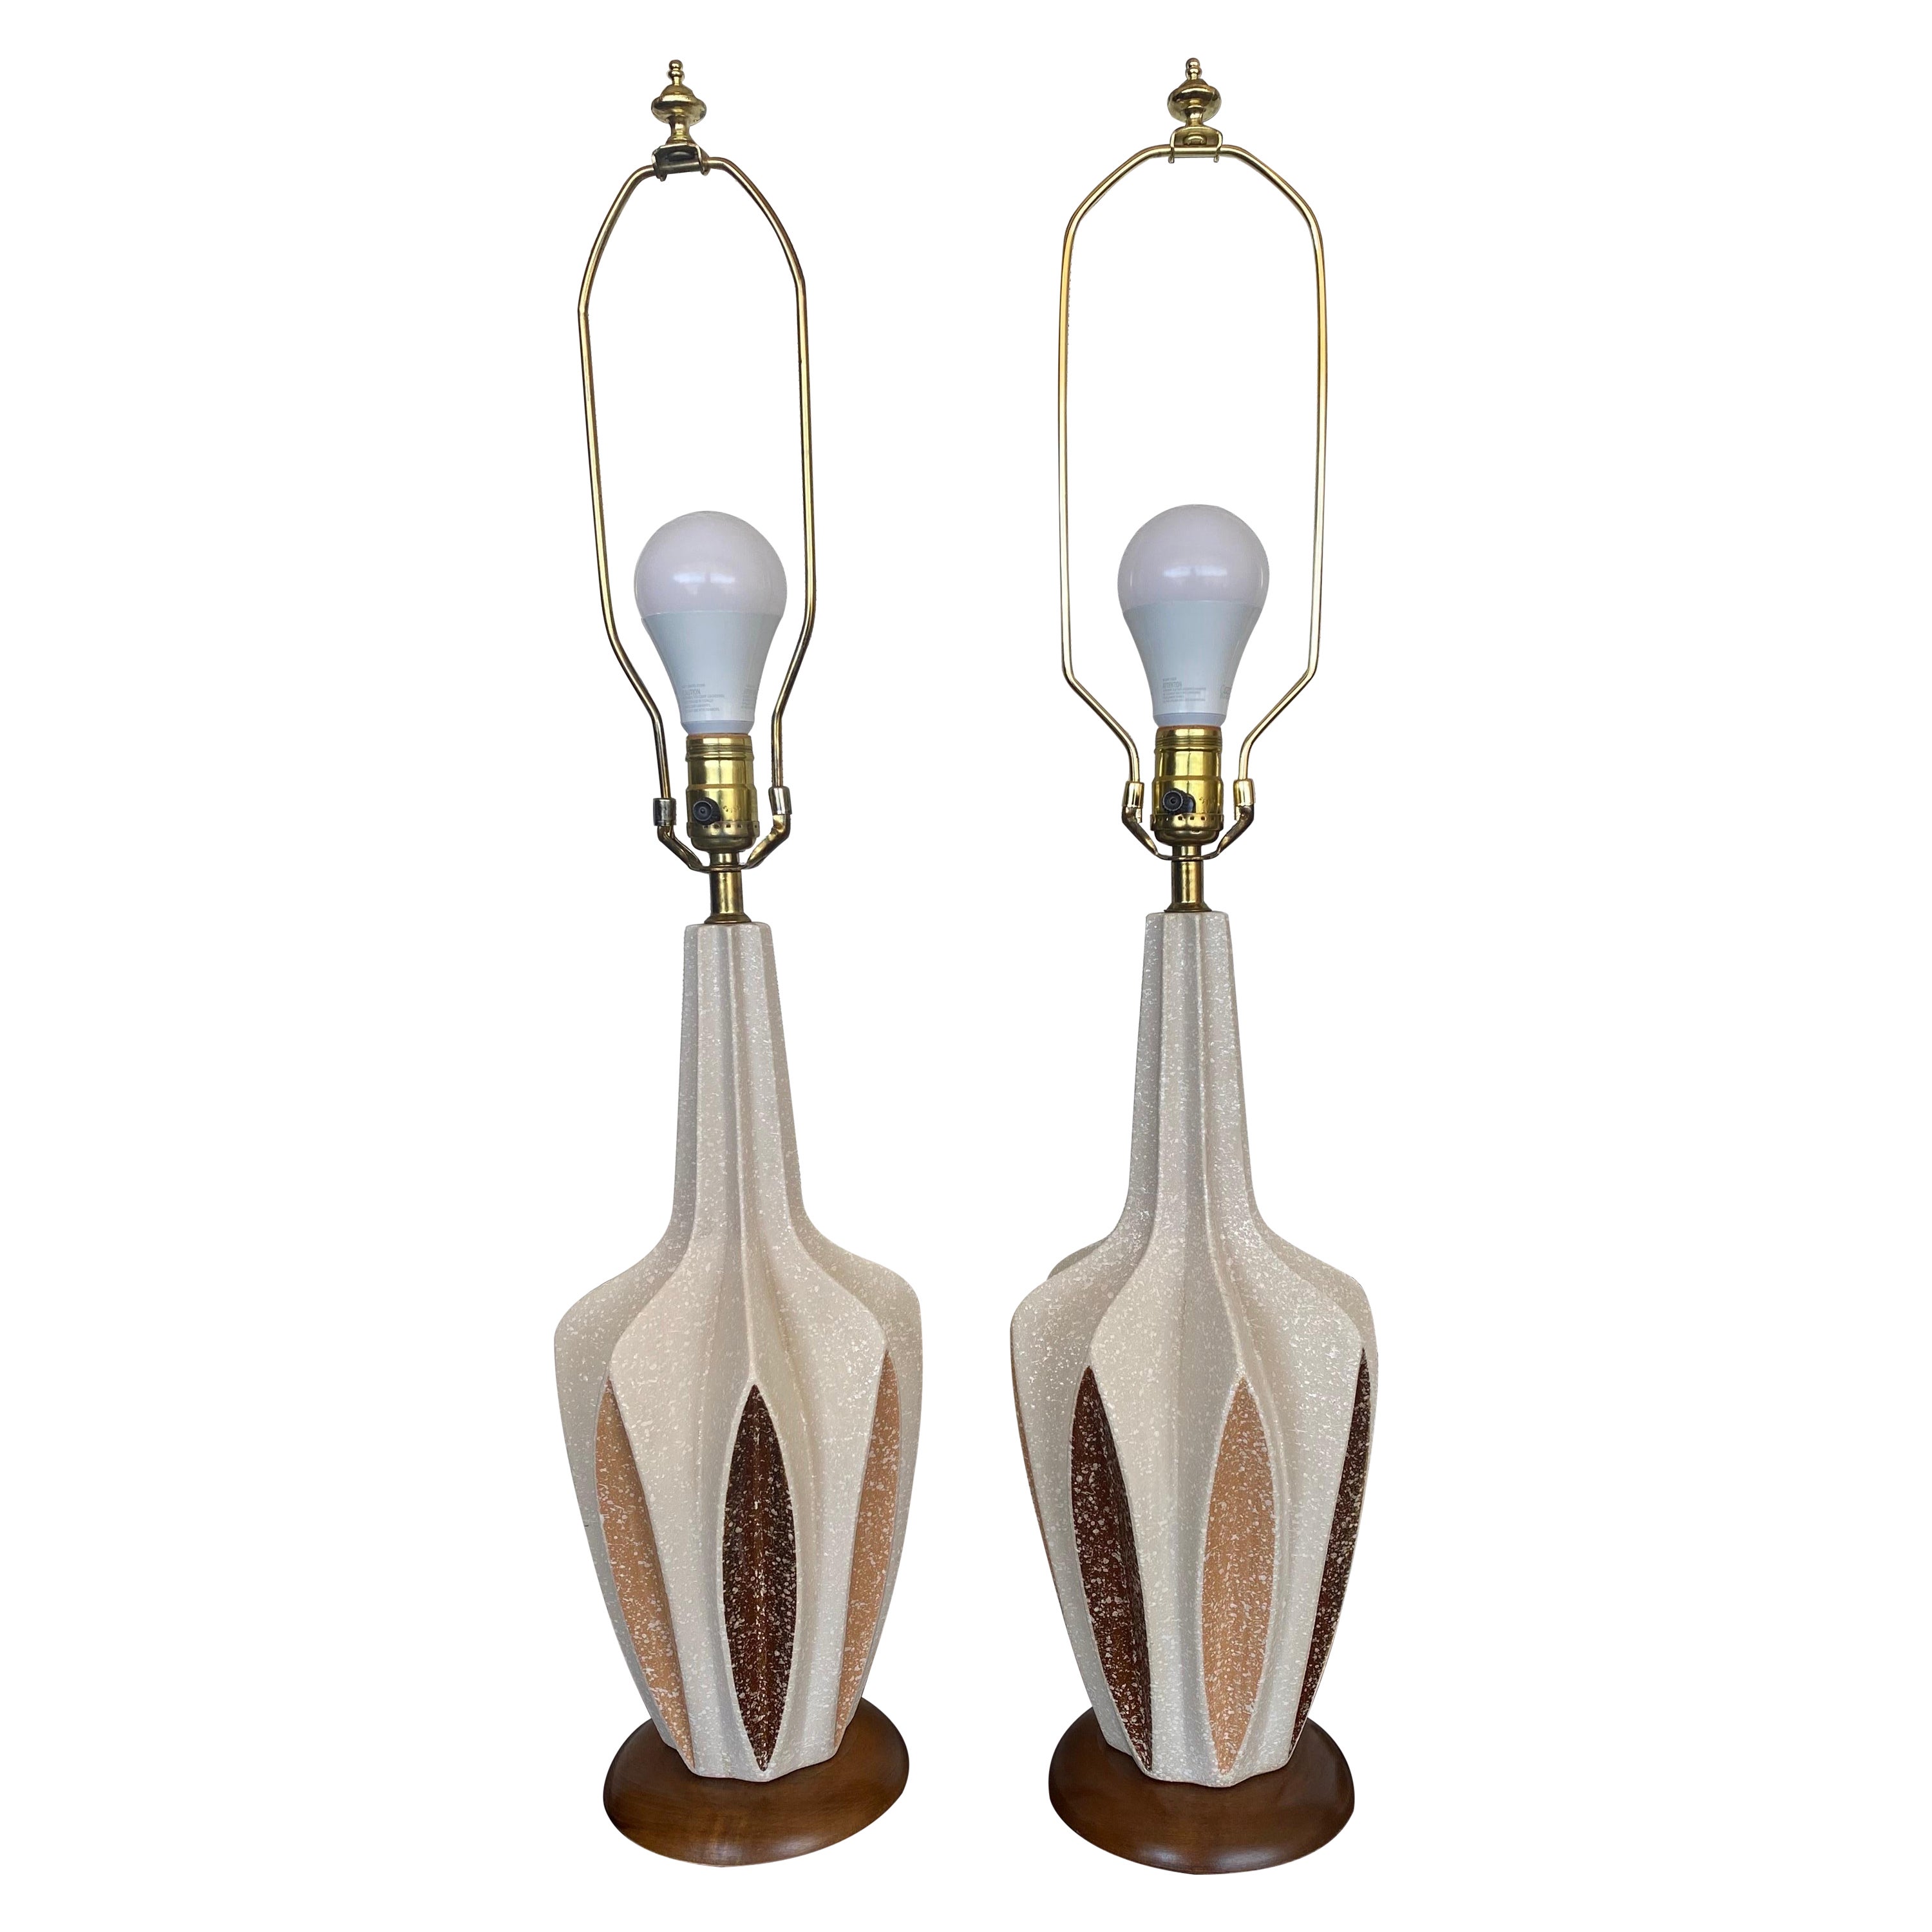 1960s Modern Italian Ceramic Lamps, a Pair For Sale